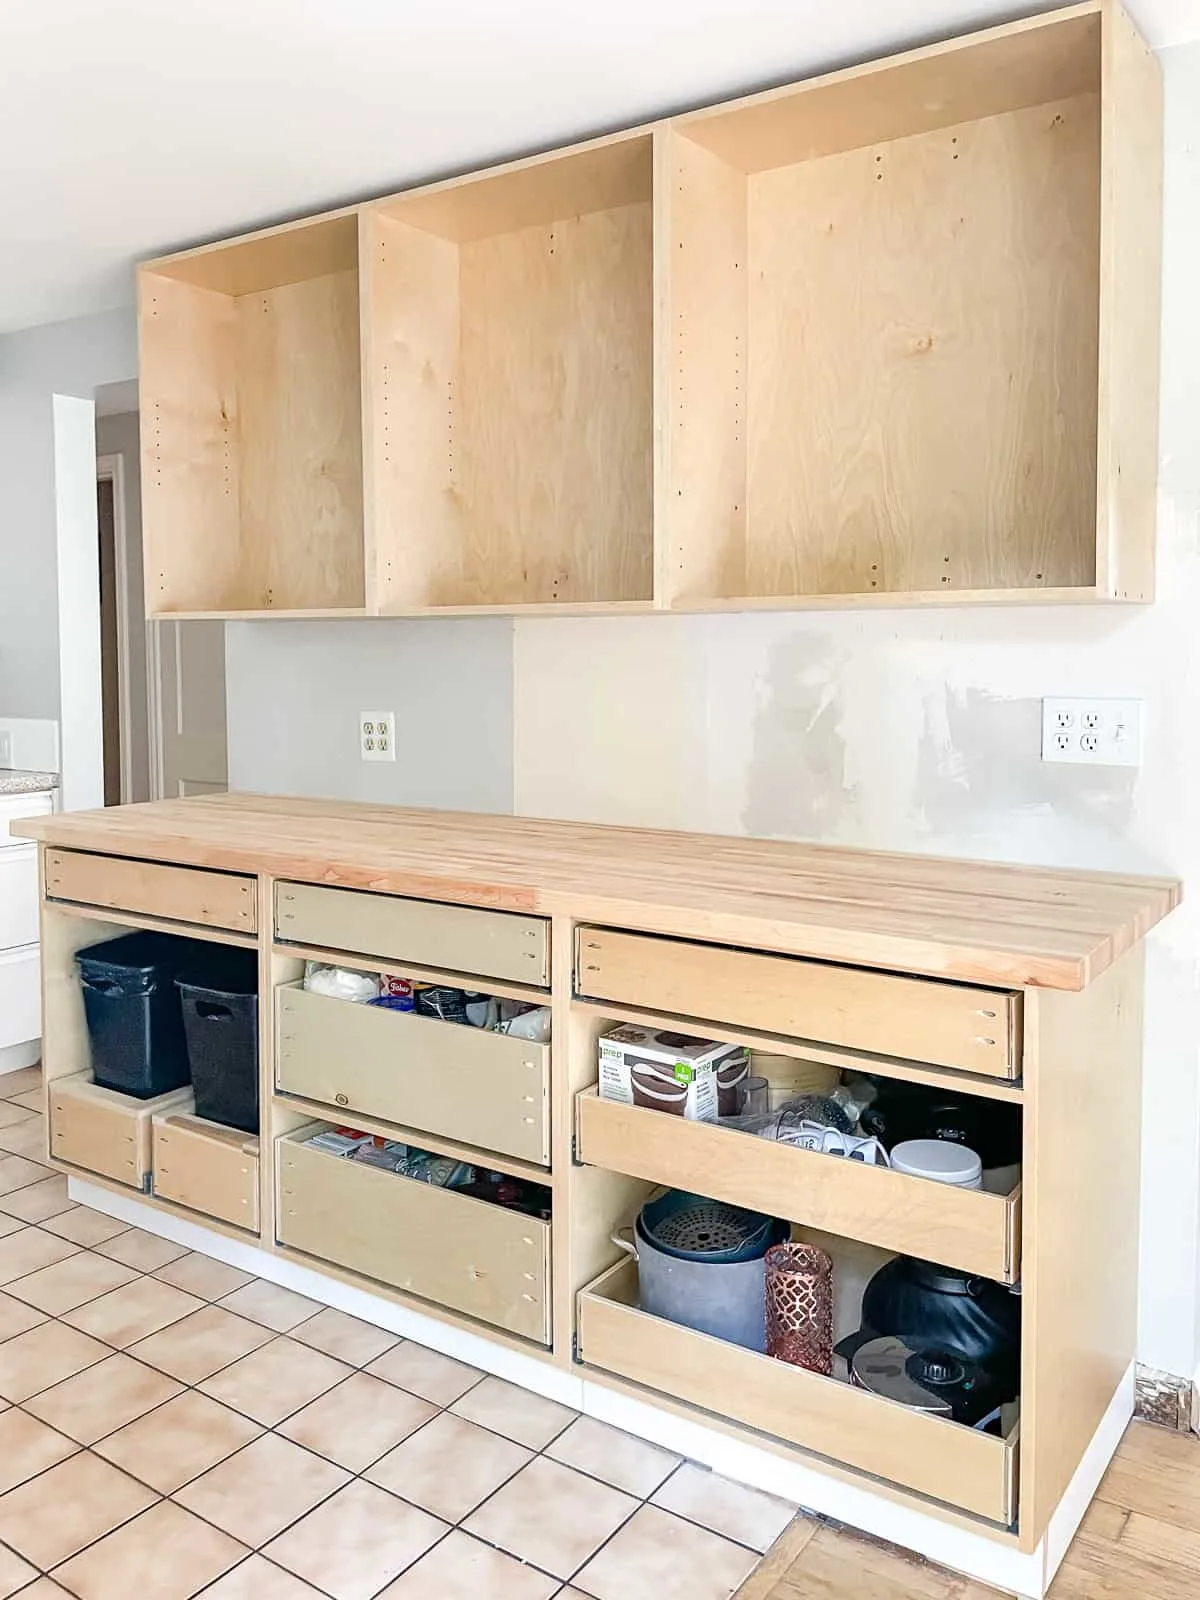 base cabinets with butcher block countertop installed